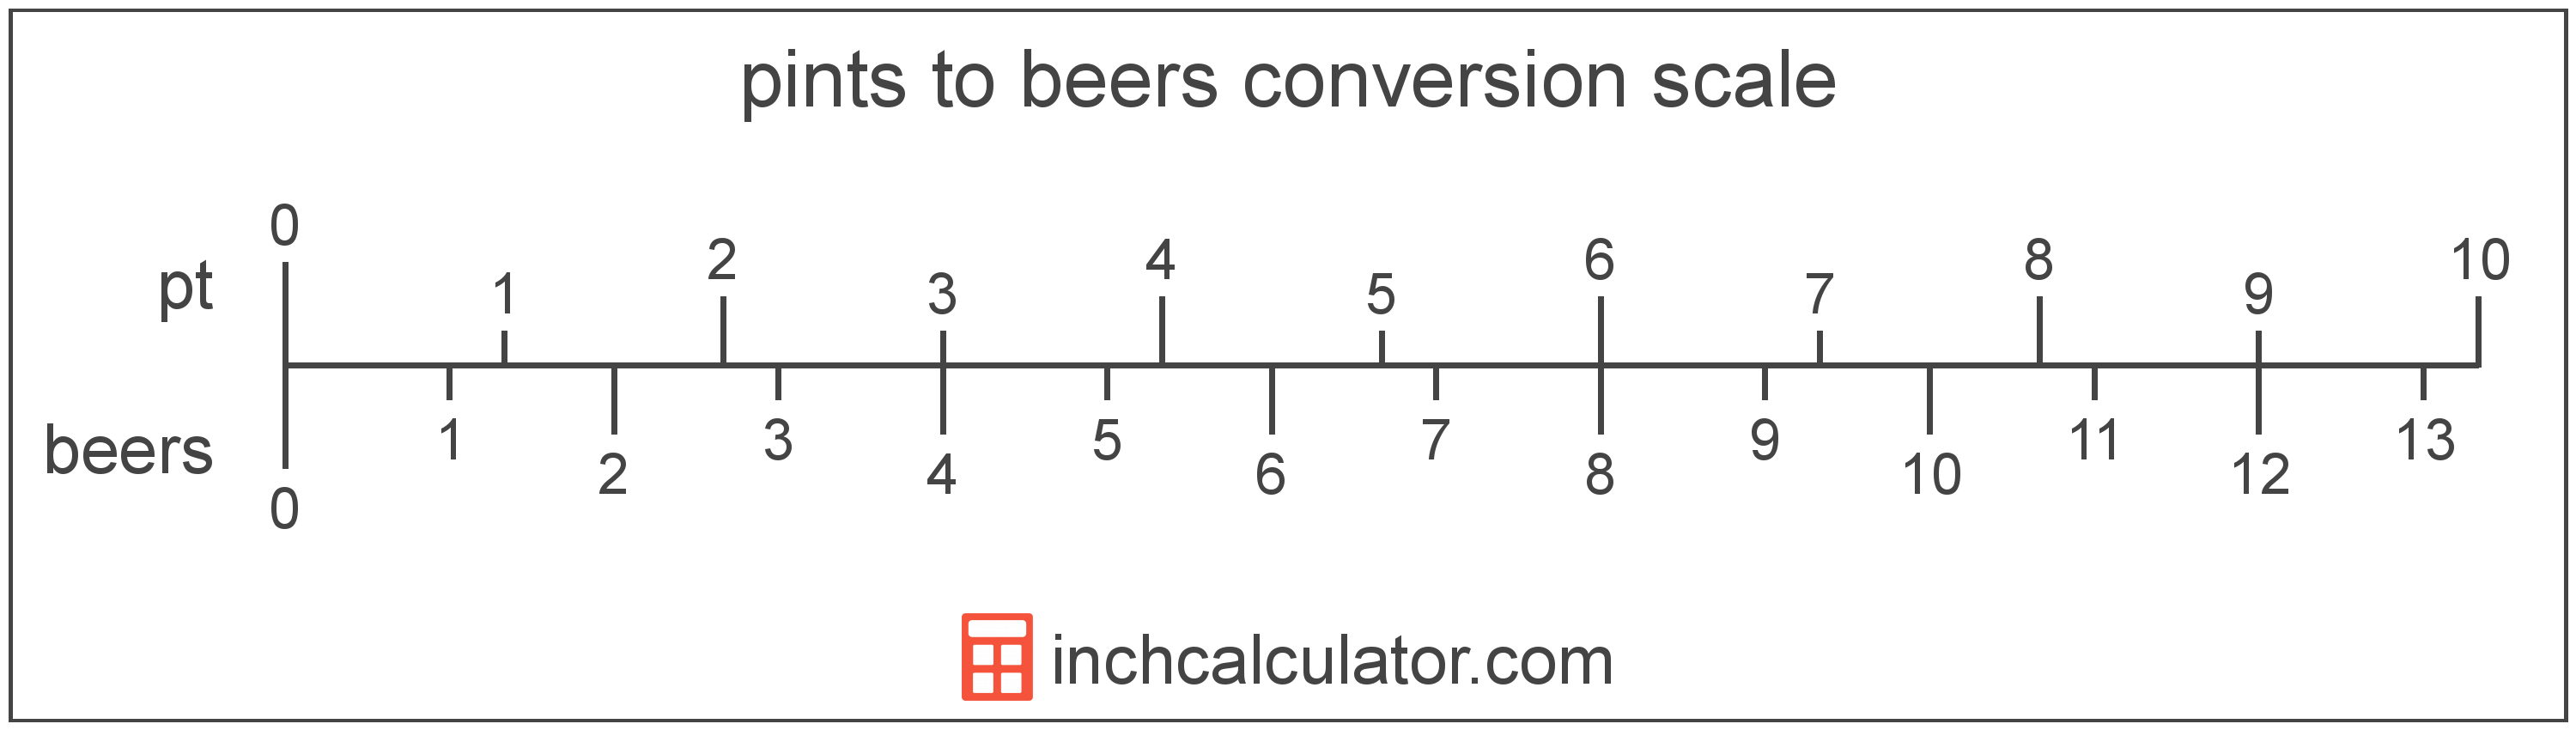 conversion scale showing beers and equivalent pints beer volume values